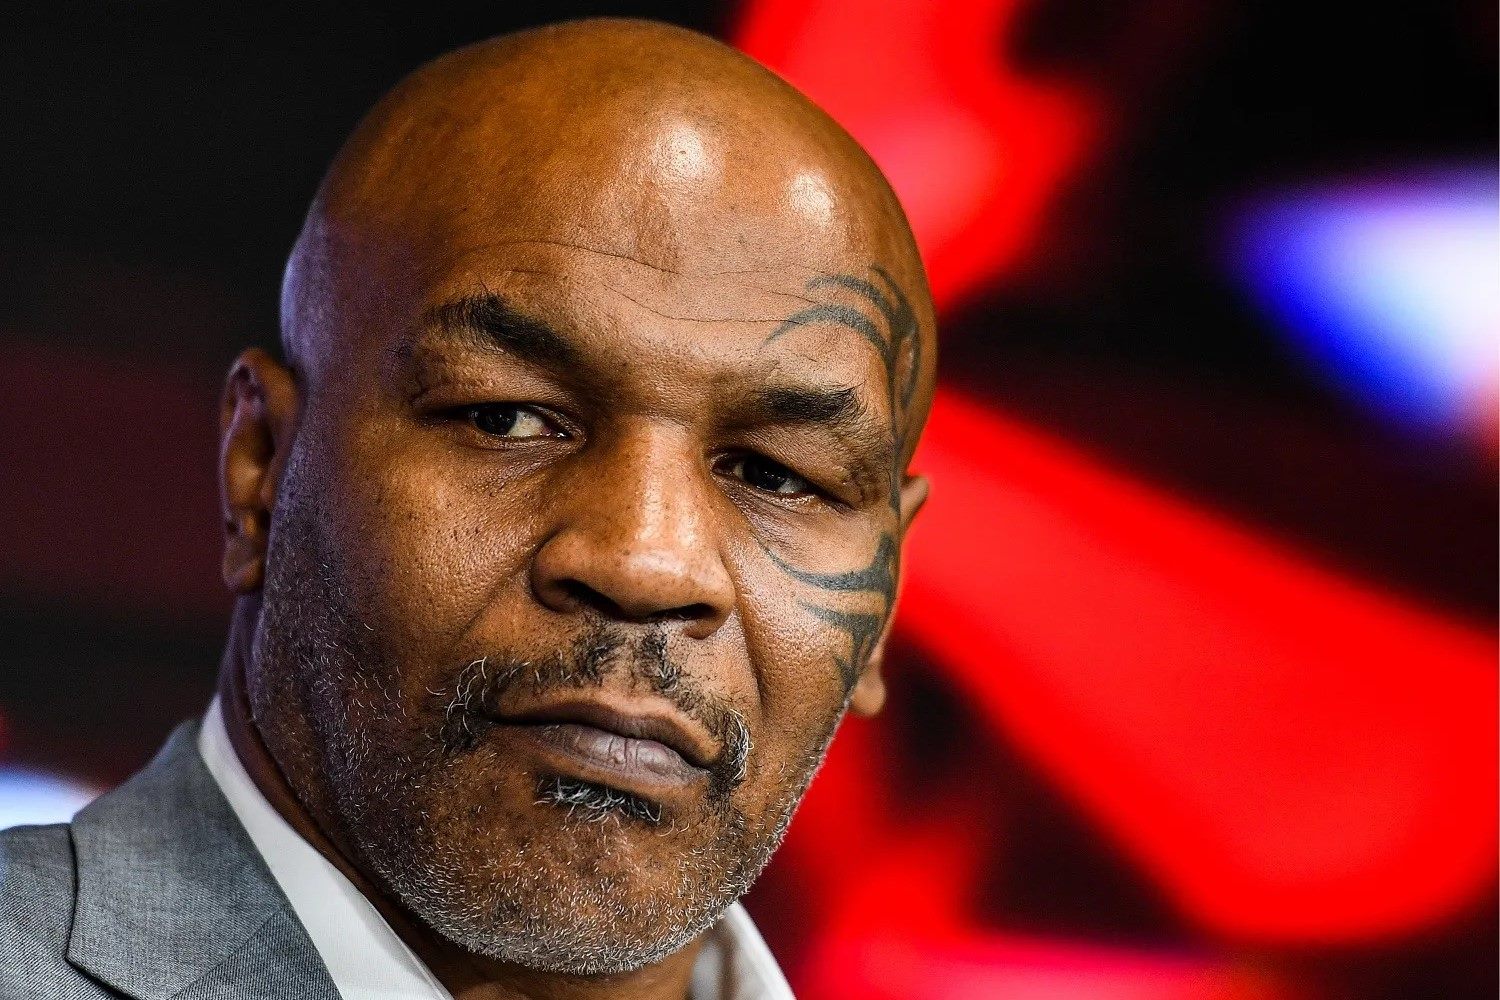 Mike Tyson’s Surprising Hypocrisy: Is He Bound For Hell According To The Quran?